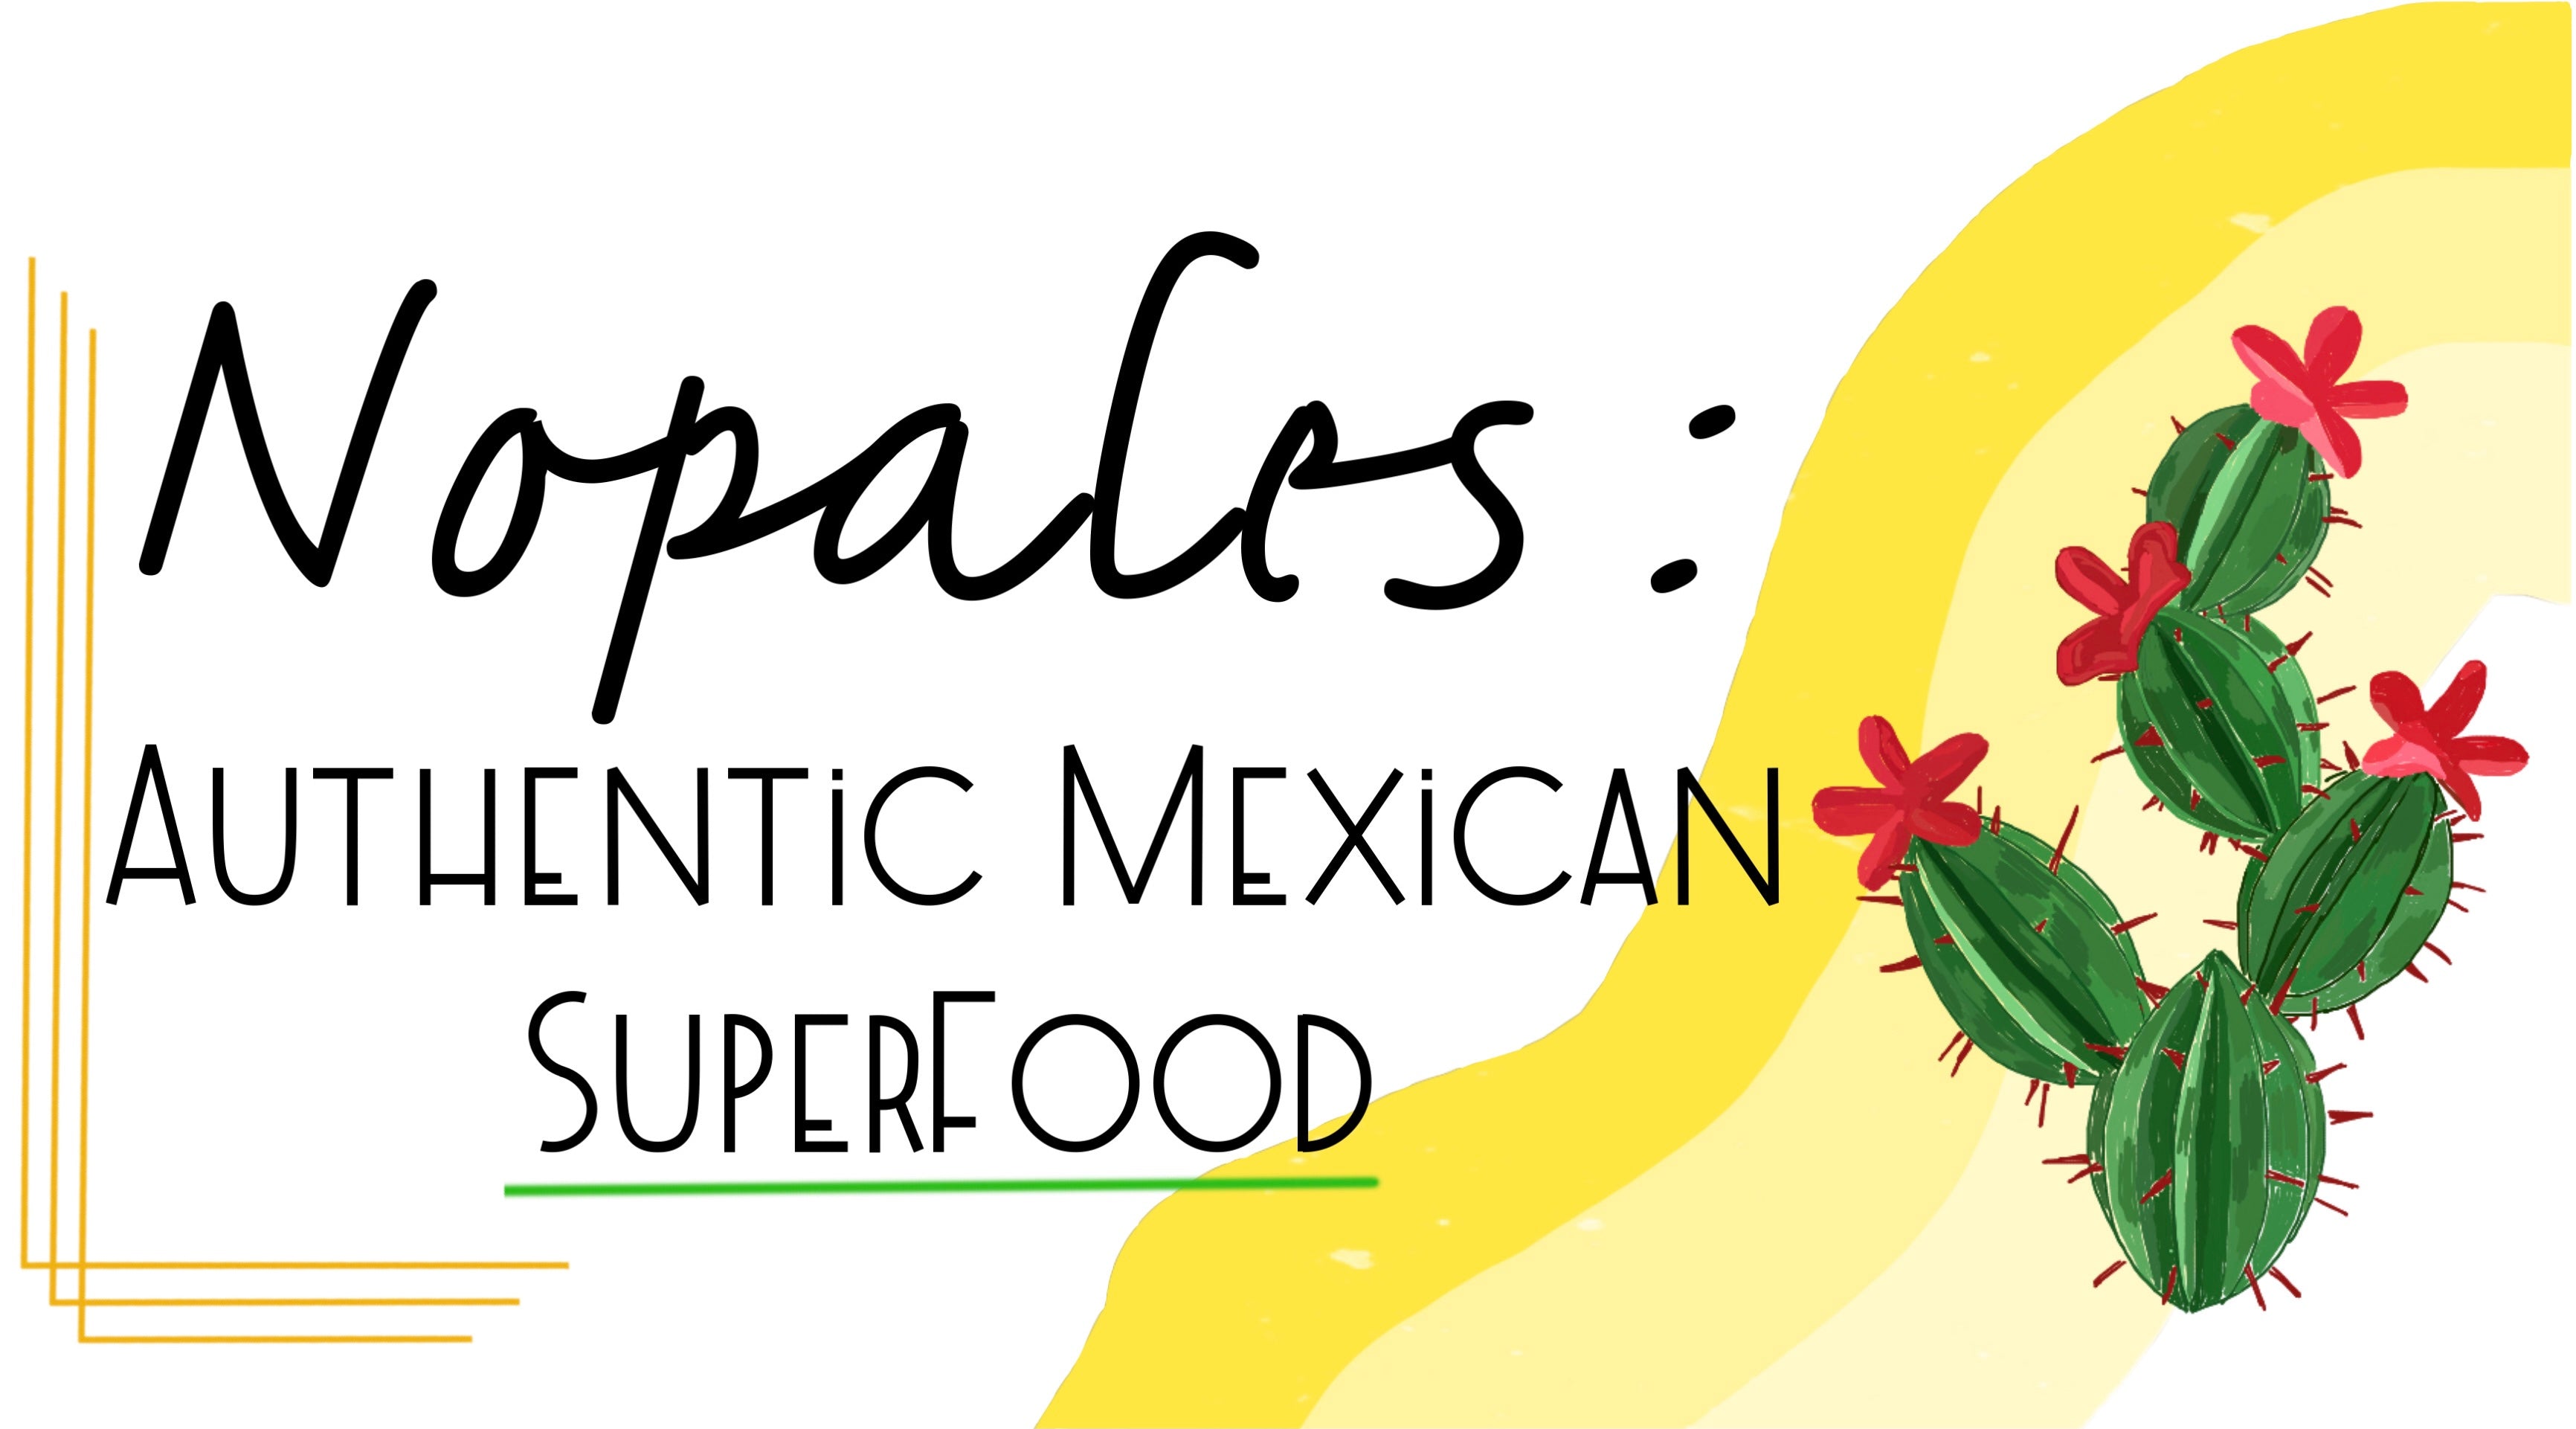 Nopales: Authentic Mexican SuperFood!